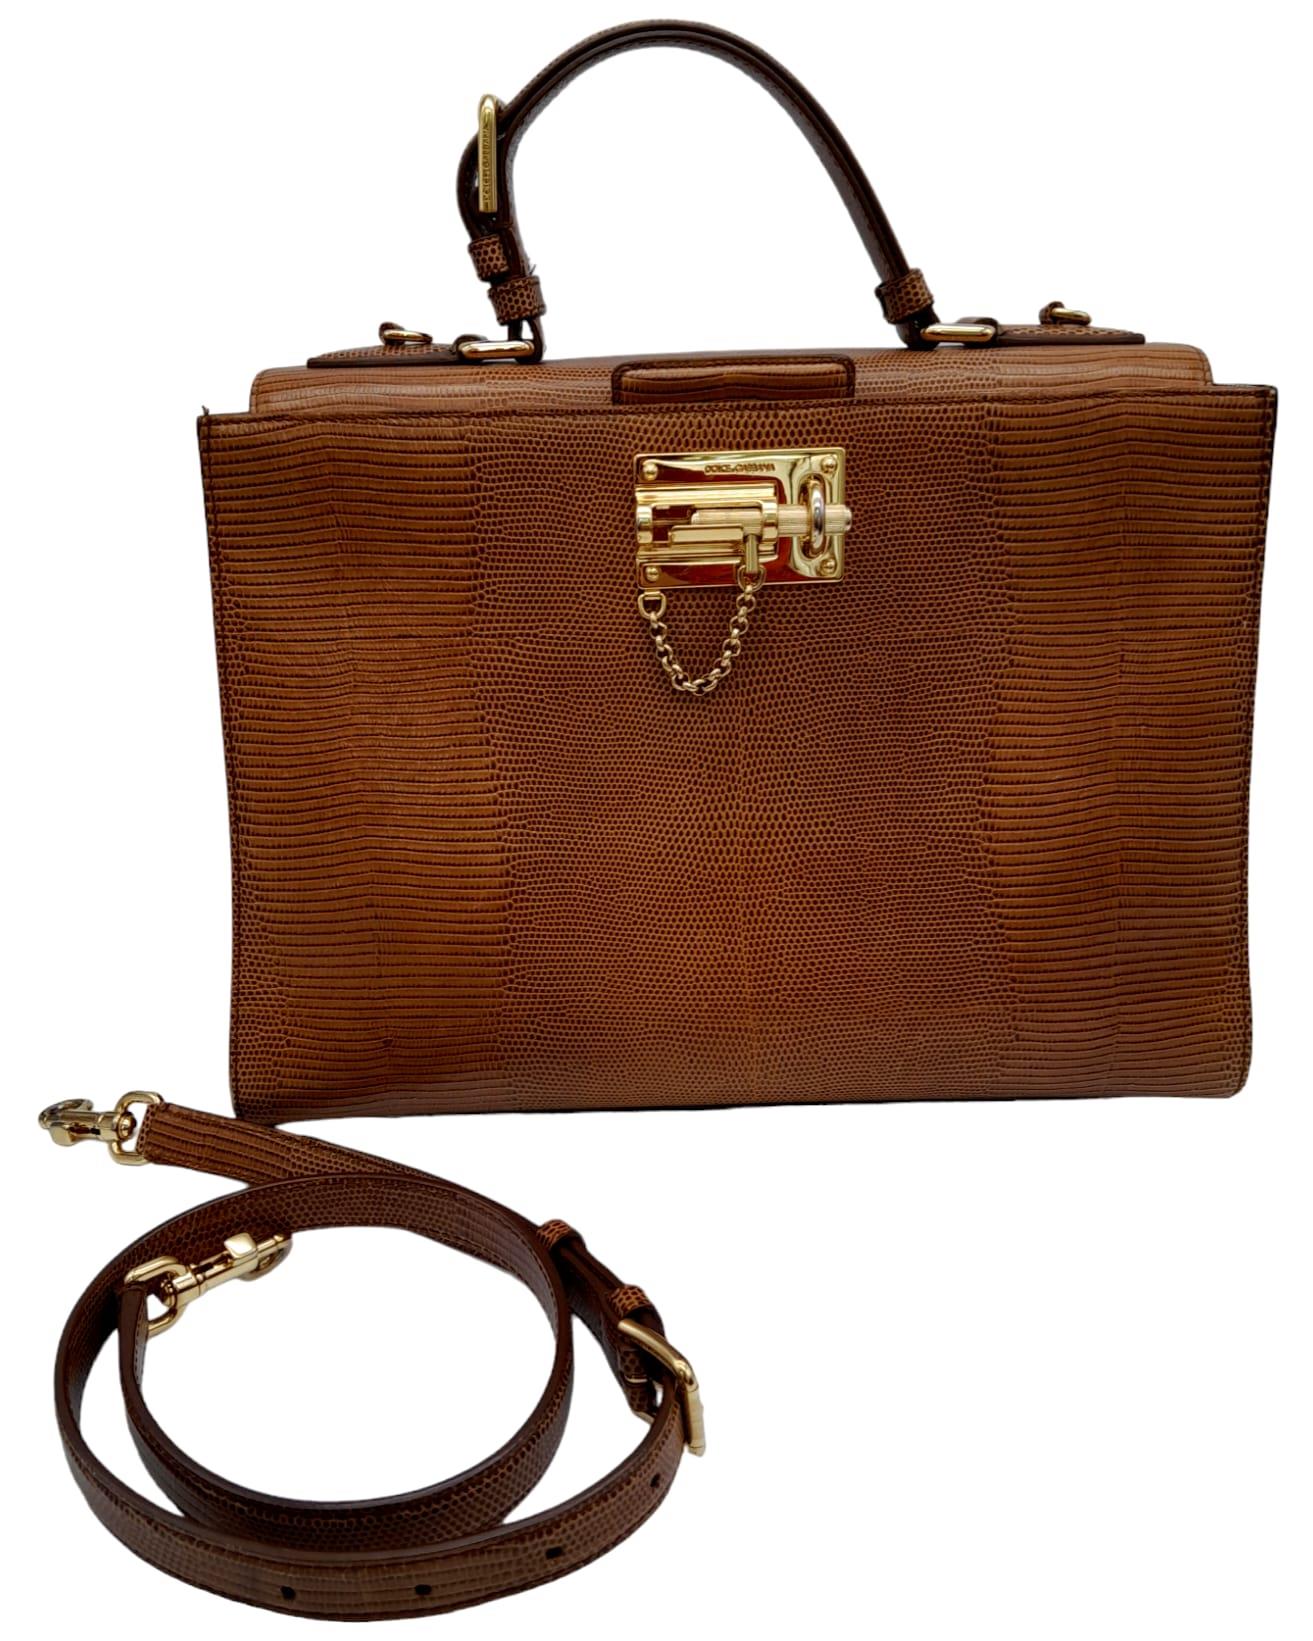 A Dolce & Gabbana Brown 'Monica' Bag. Lizard embossed leather exterior, with a single handle and